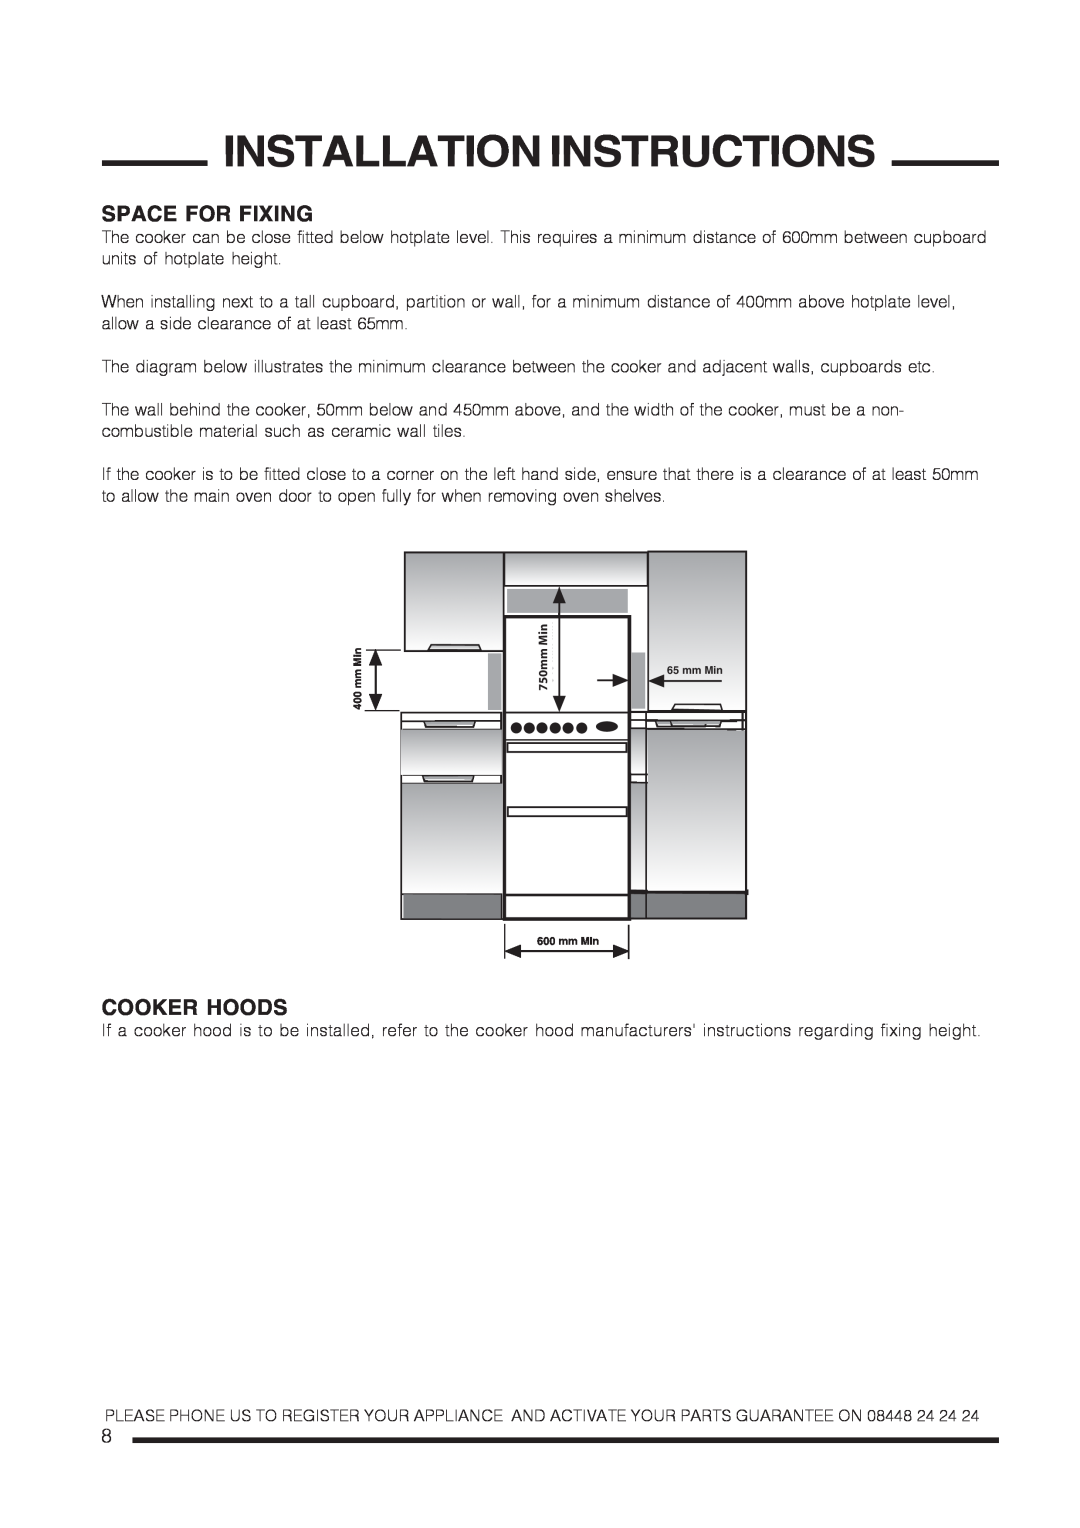 Xerox CH60DTXF, CH60DTCF, CH60DPXF, CH60DPCF Space For Fixing, Cooker Hoods, Installation Instructions, 750mm 